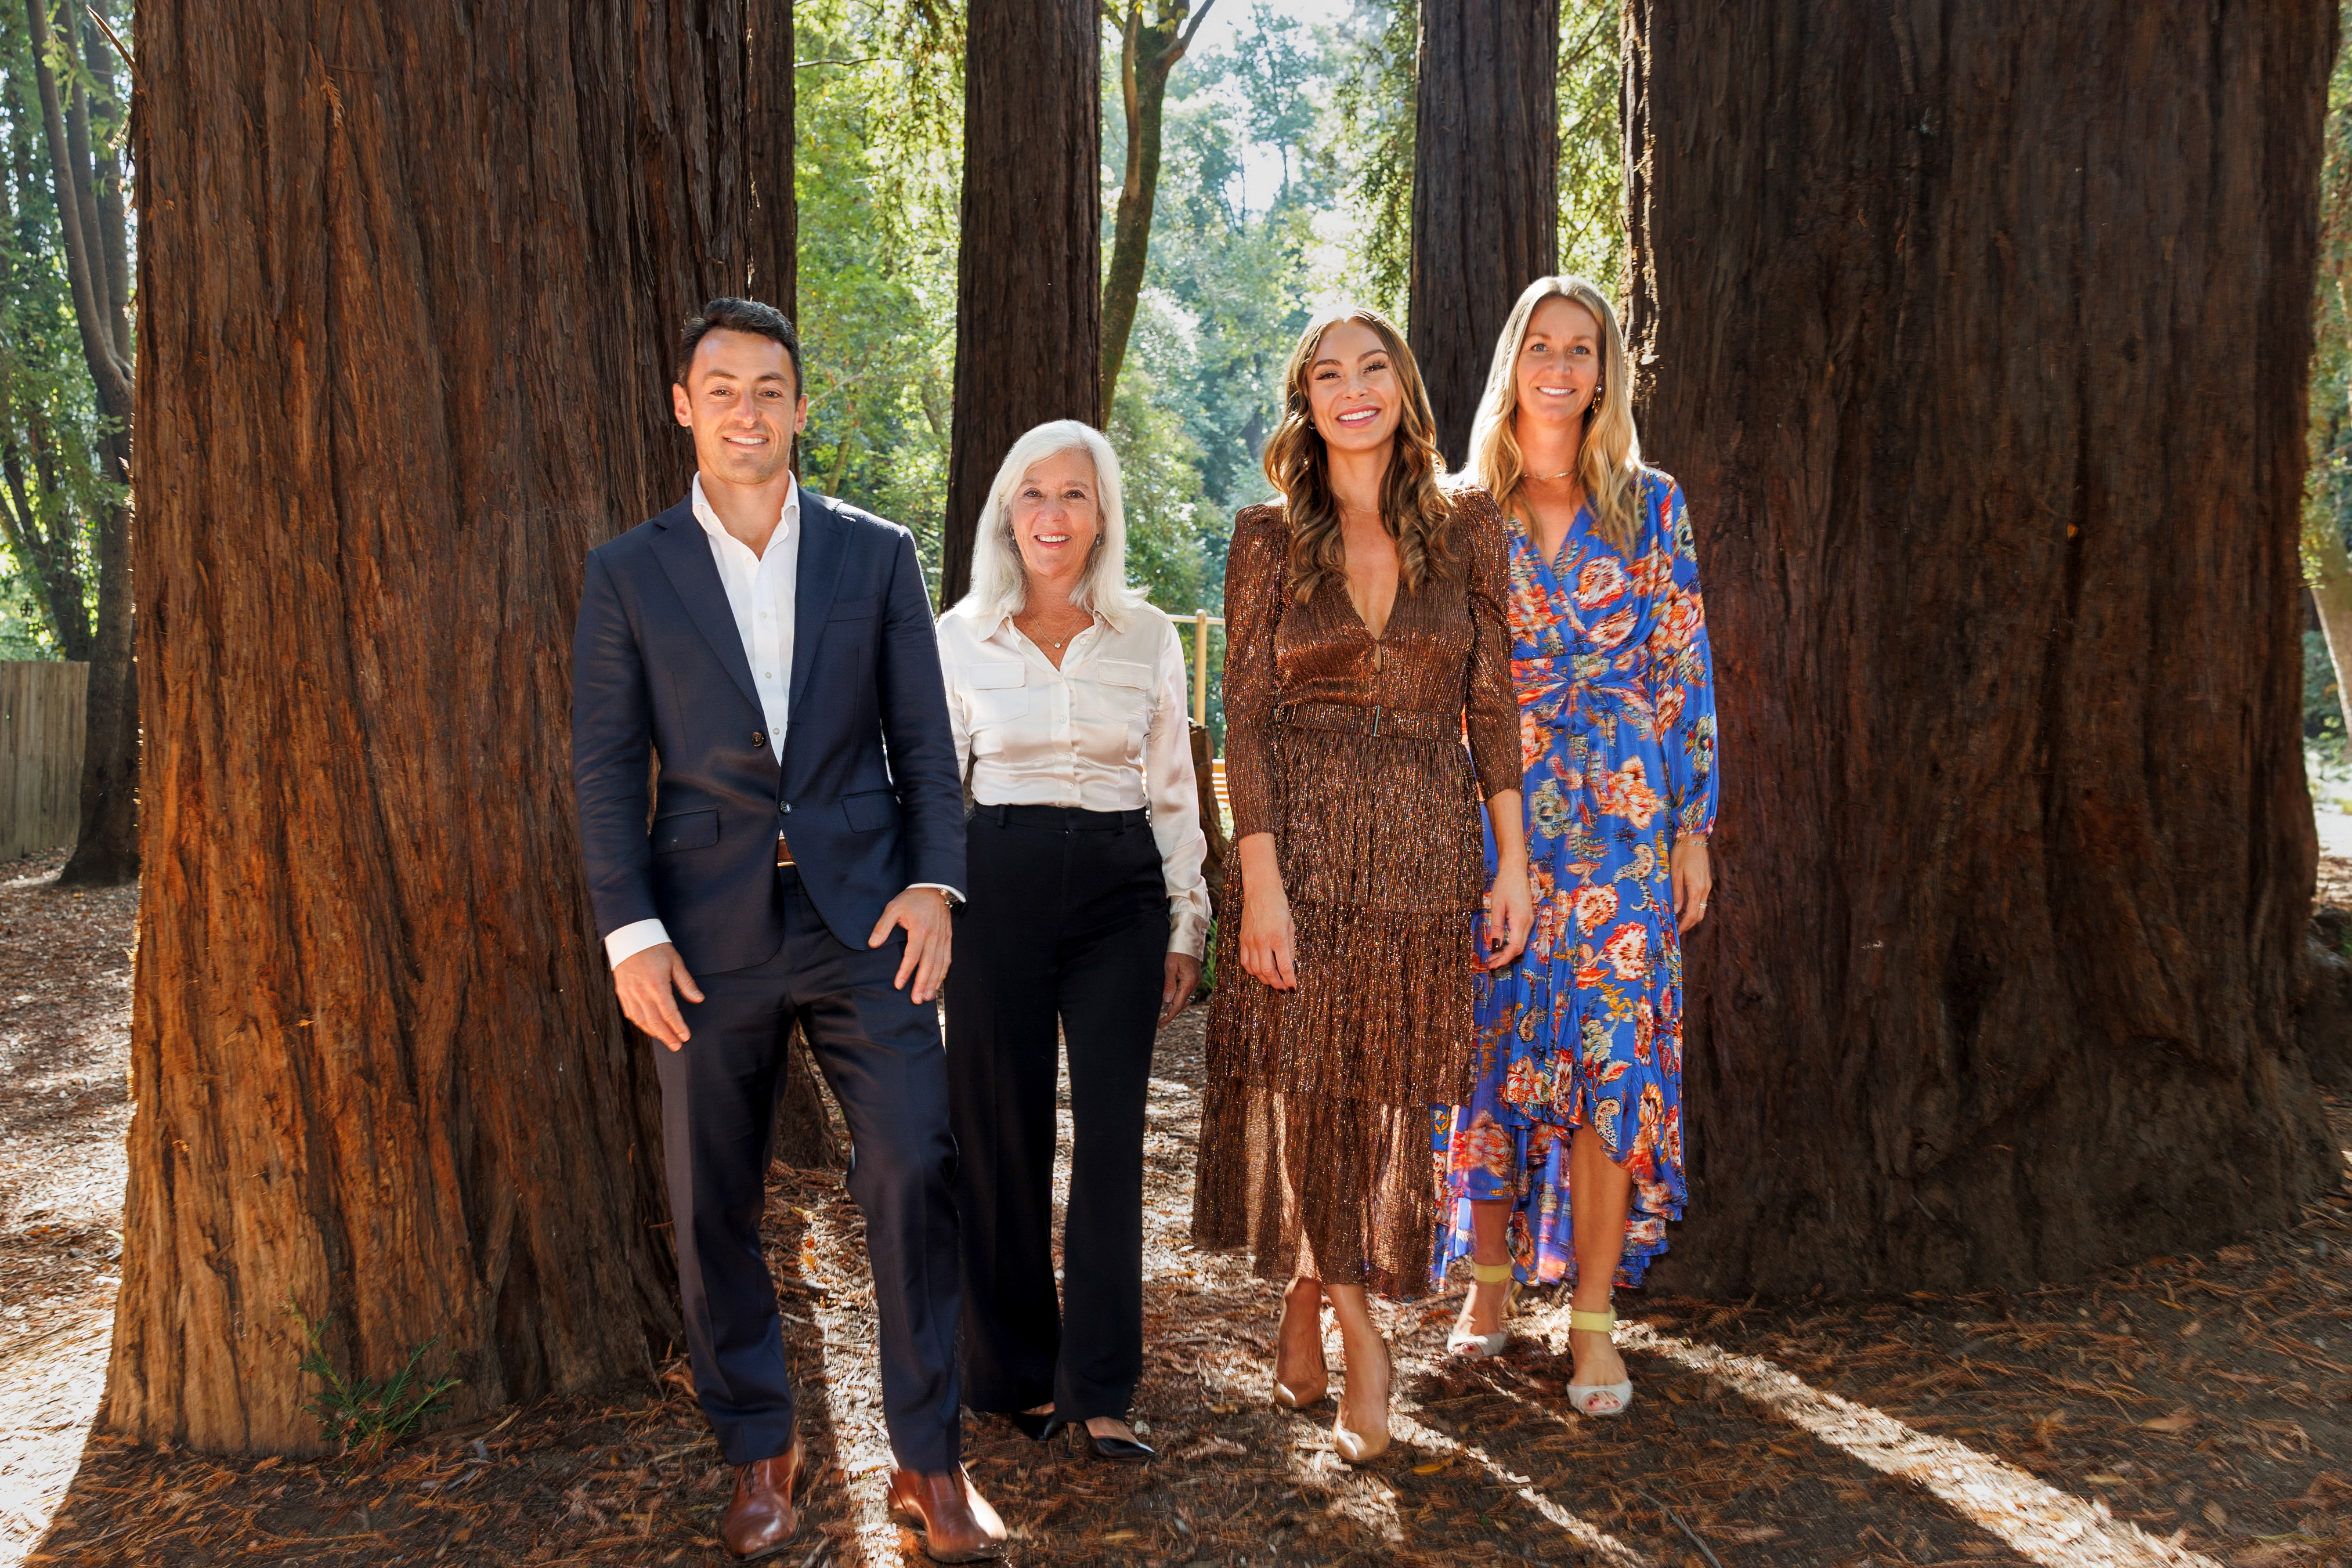 Professional real estate team standing confidently amidst towering redwood trees, embodying The Key to Your Dreams® in Marin County.